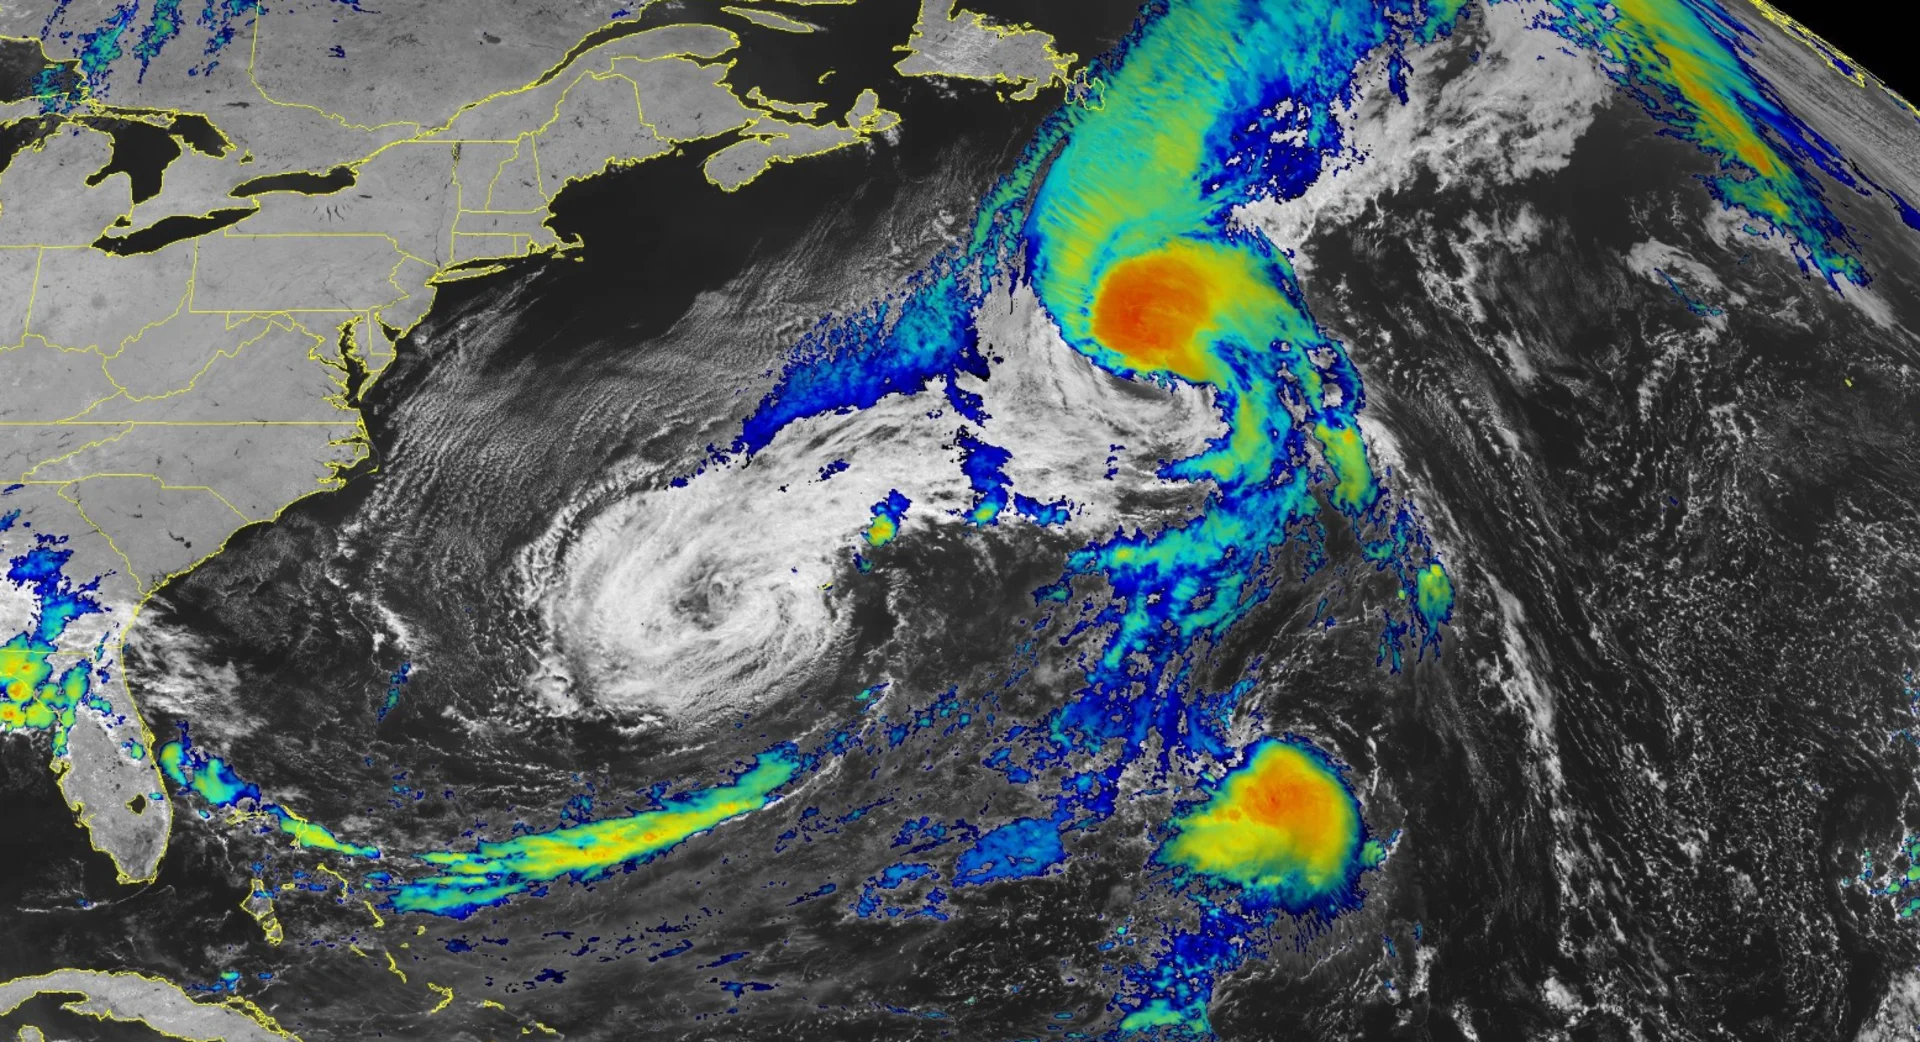 Full house: Atlantic packed with storms as peak season approaches